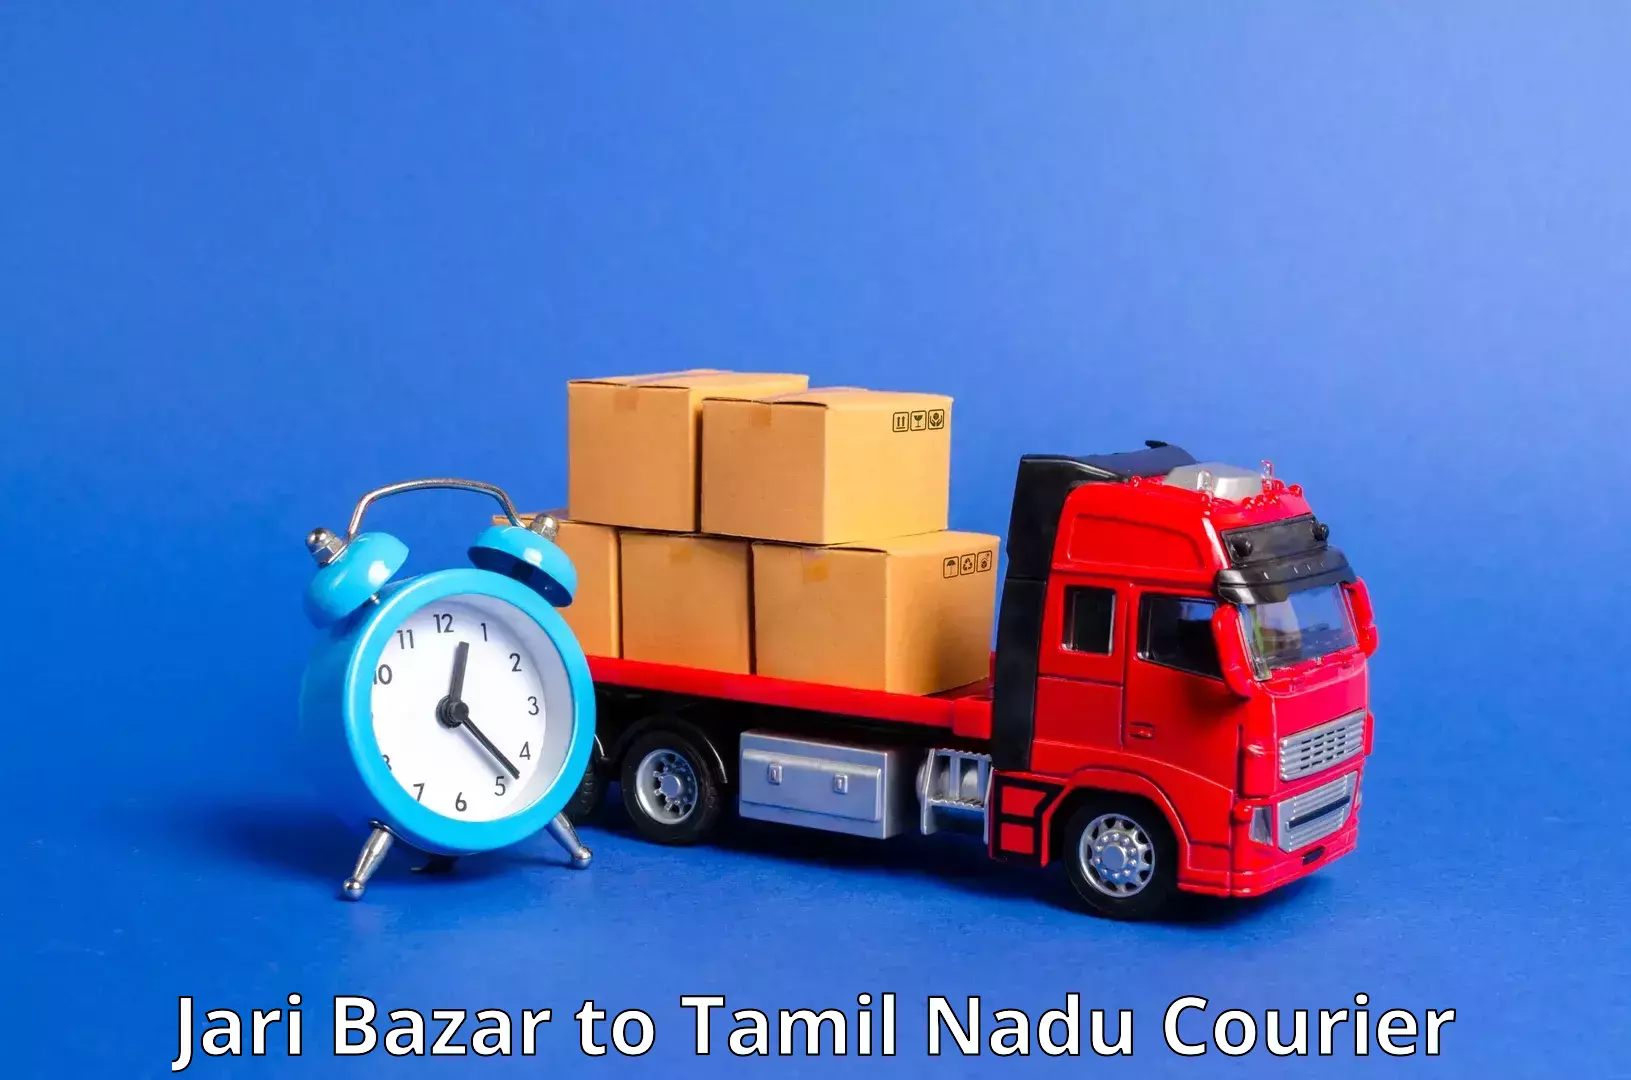 International courier networks Jari Bazar to Shanmugha Arts Science Technology and Research Academy Thanjavur